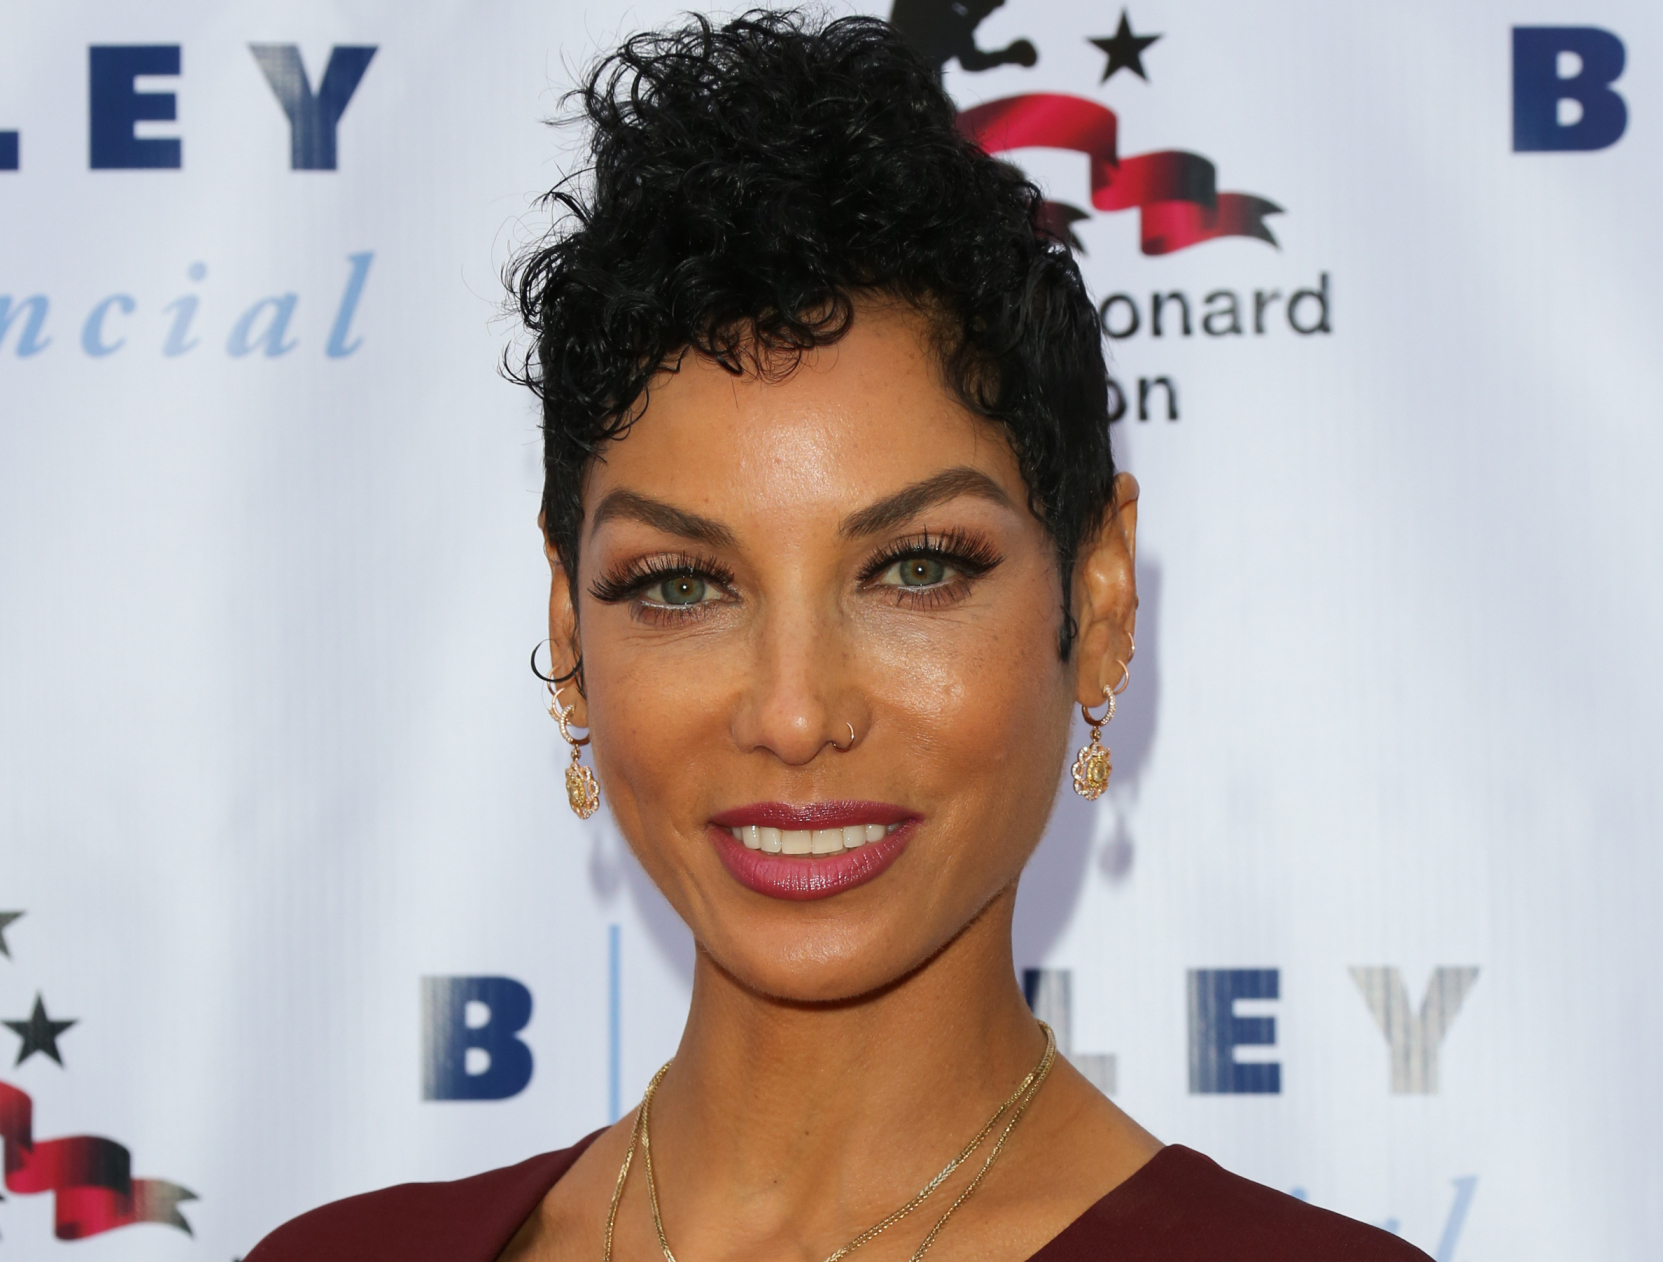 HOLLYWOOD, CA - MAY 25: Model / TV Personality Nicole Mitchell Murphy attends the 7th annual "Big Fighters, Big Cause Charity Boxing Night" benefiting the Sugar Ray Leonard Foundation at The Ray Dolby Ballroom at Hollywood & Highland Center on May 25, 2016 in Hollywood, California. (Photo by Paul Archuleta/FilmMagic)